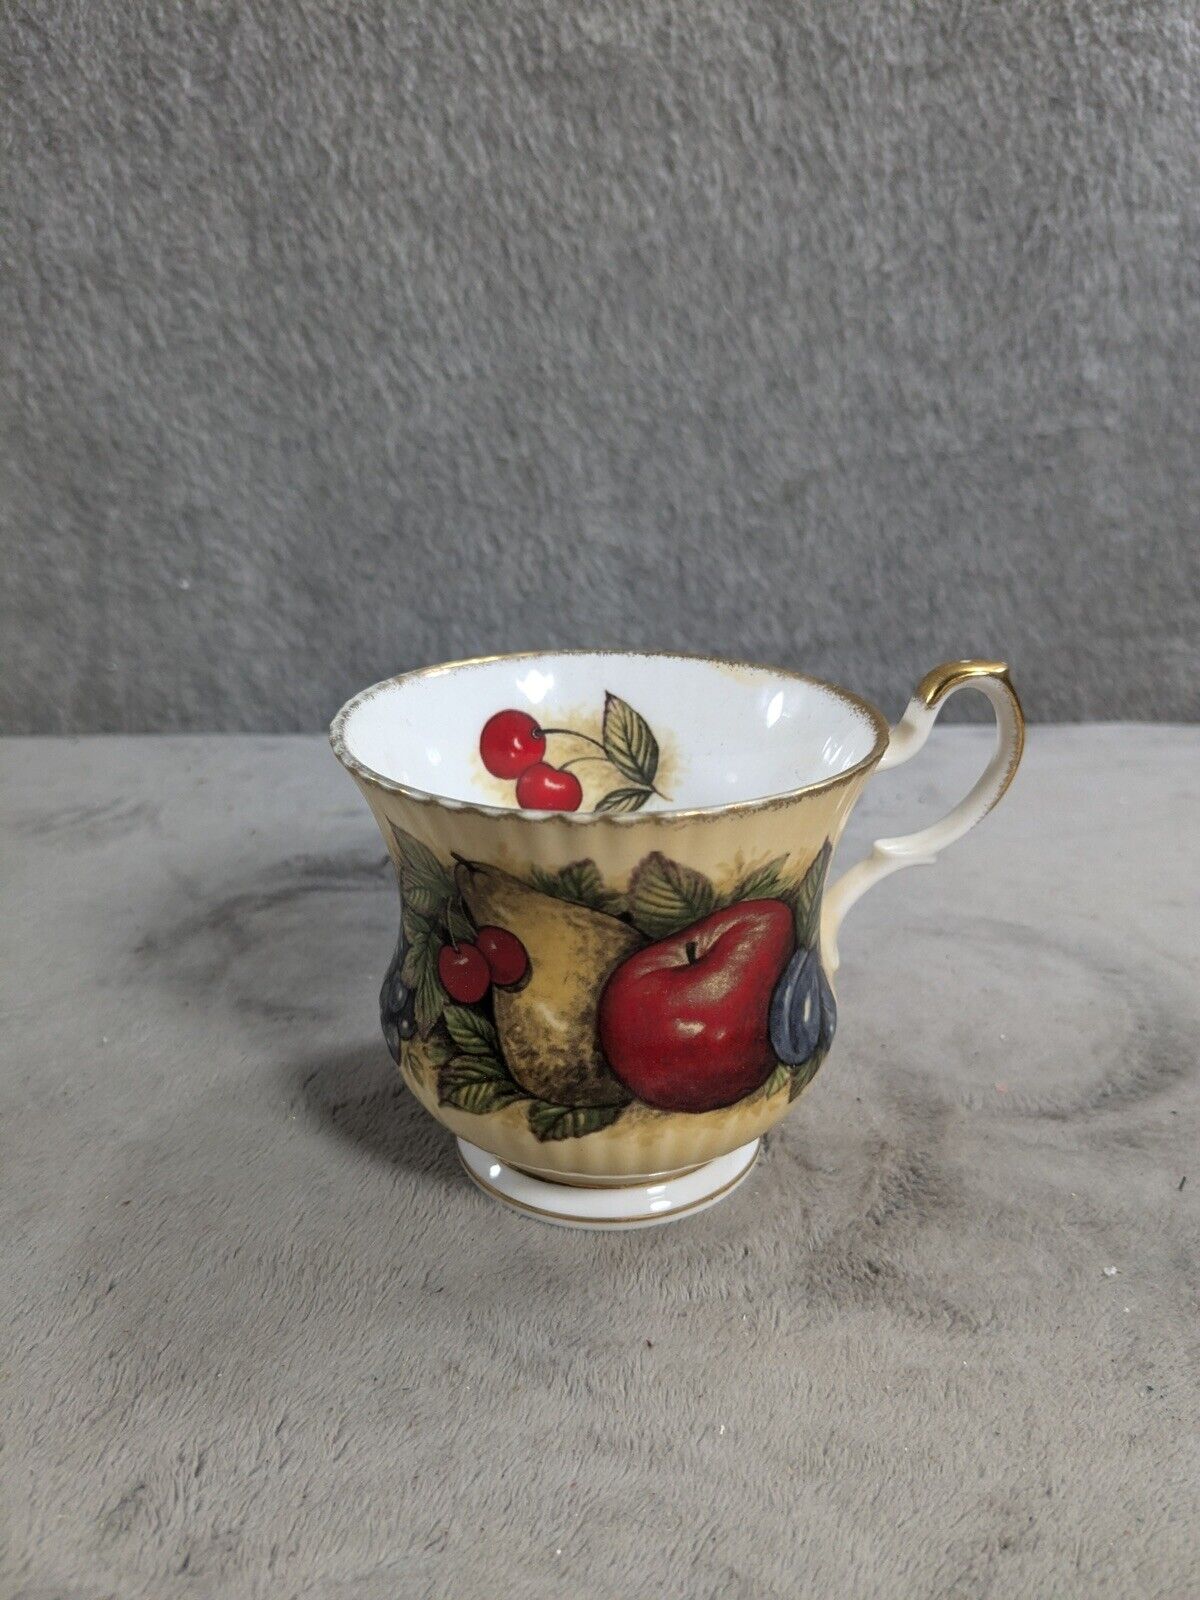 Queen's Fine Bone China Teacup Antique Fruit Series Crownford Made in England 